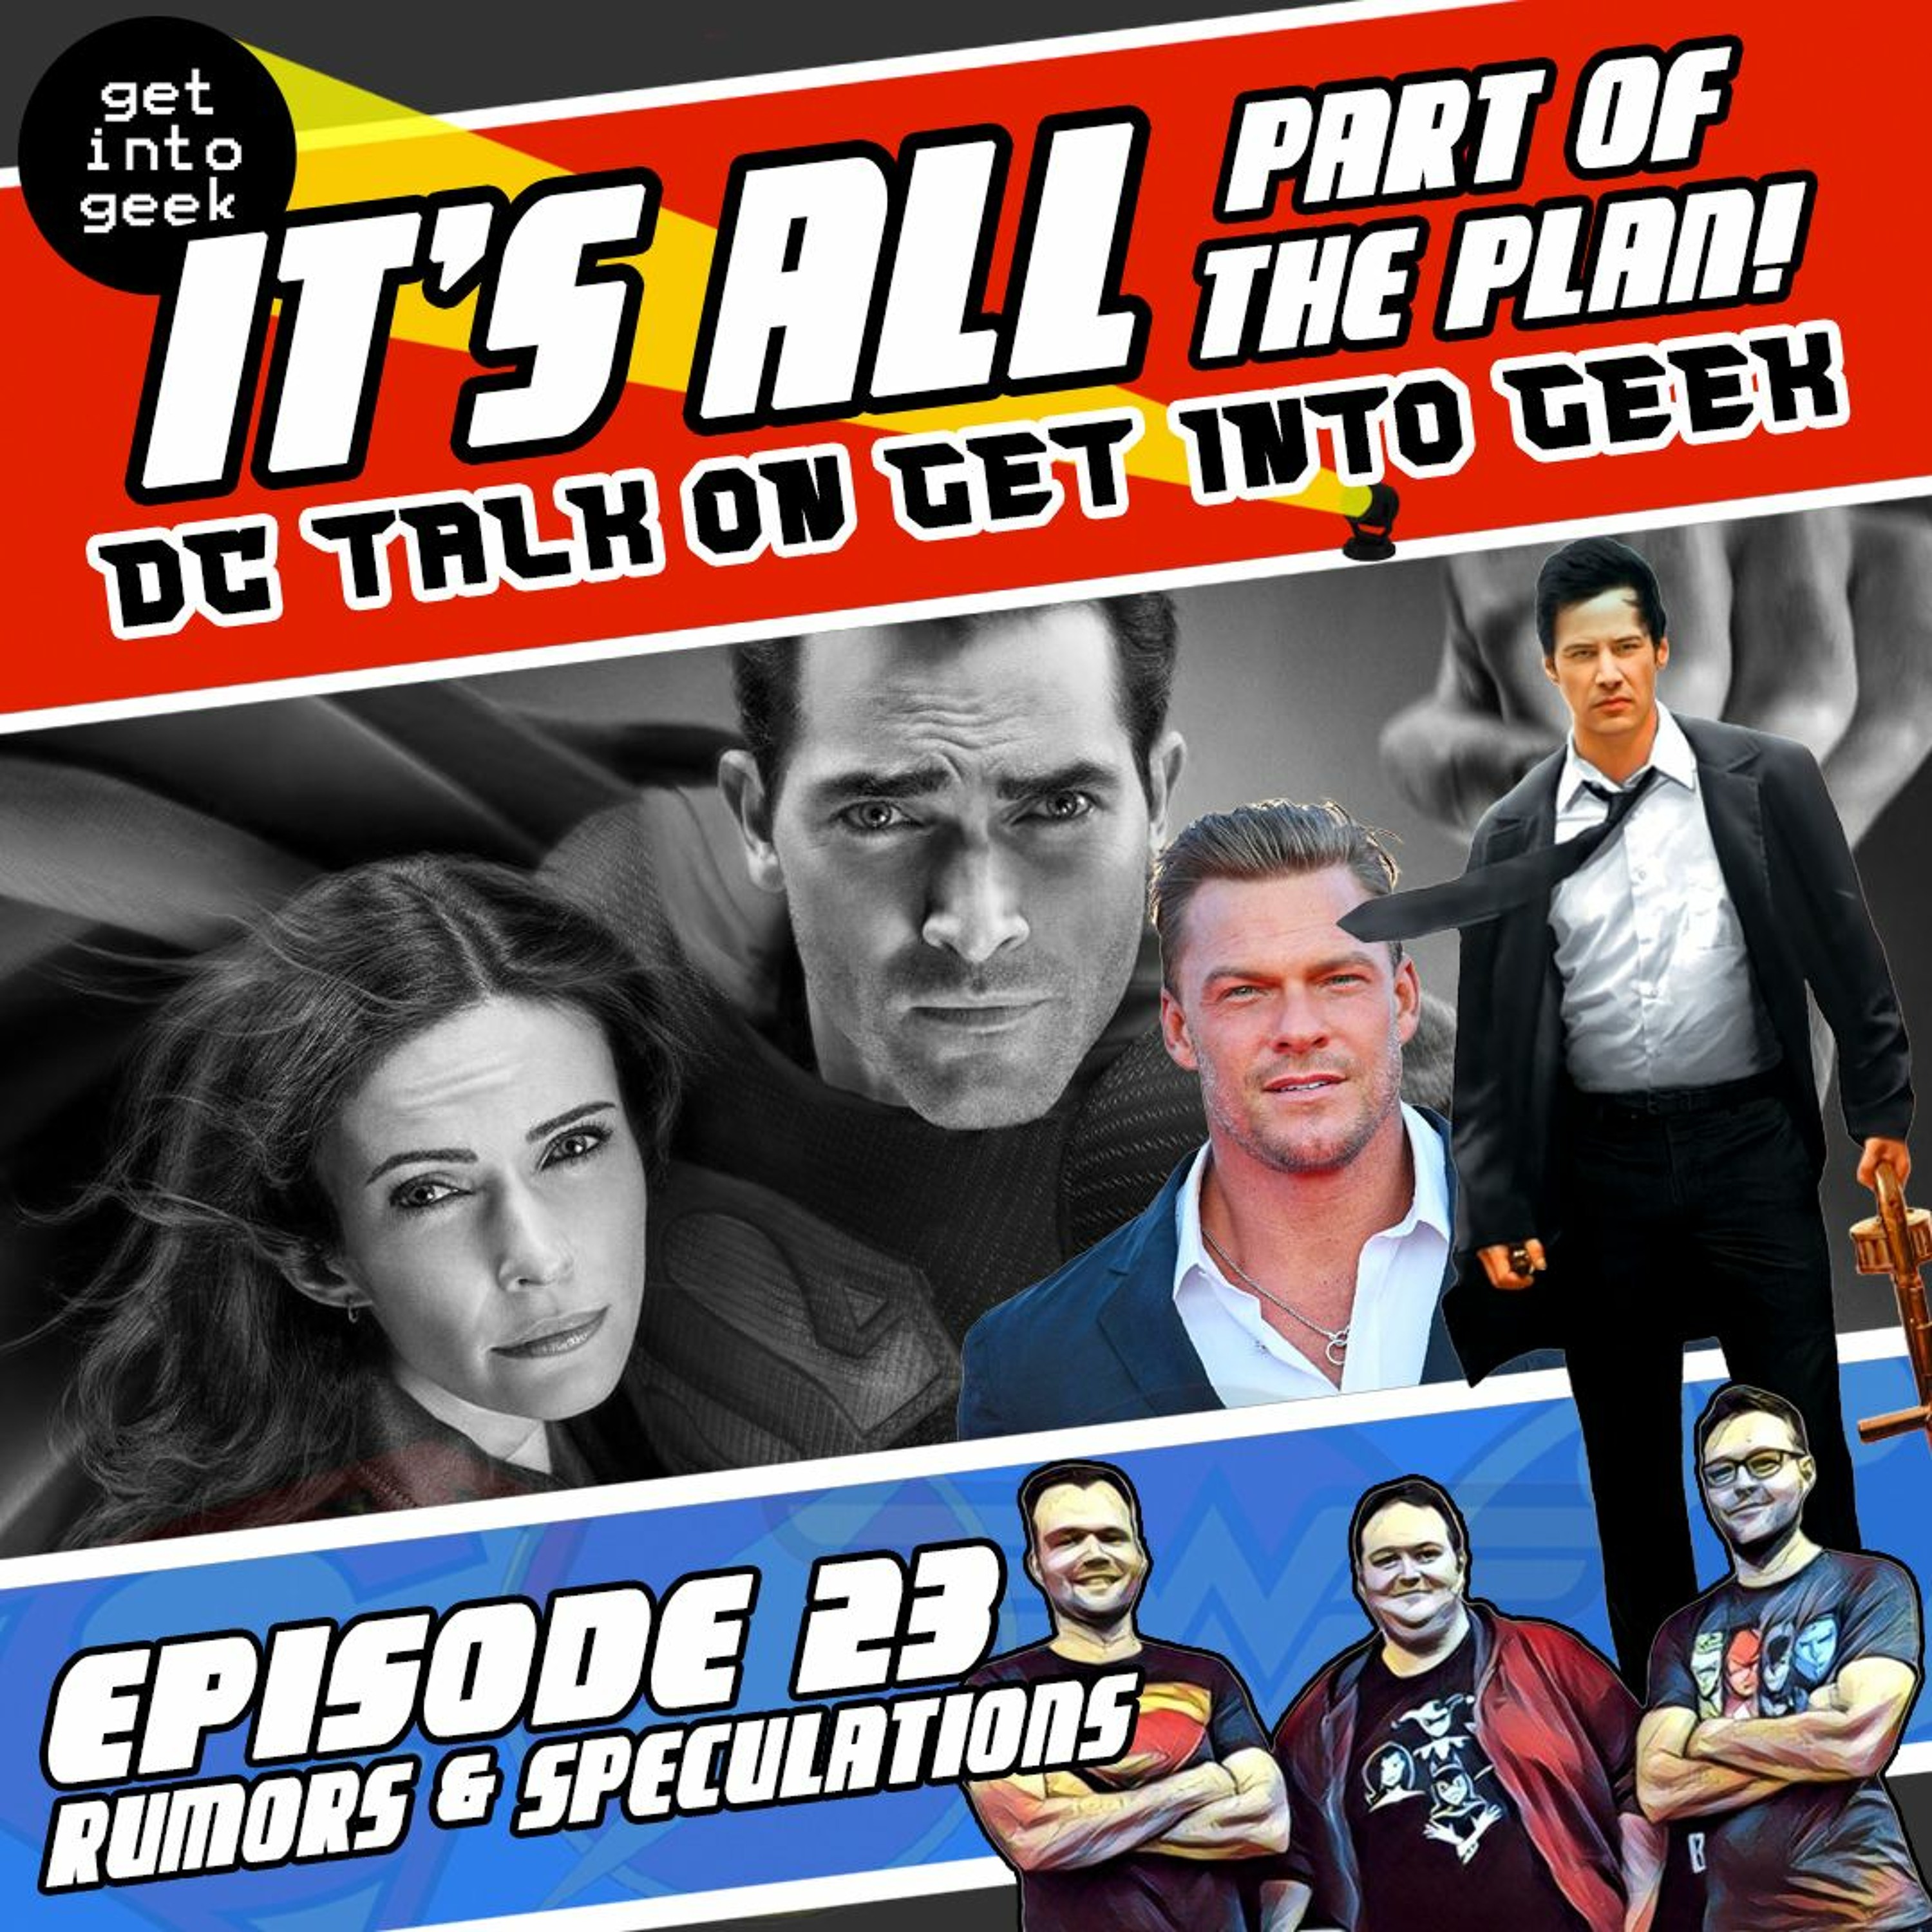 Rumors & Speculations (It's All Part Of The Plan - DC Talk Episode 1.23)